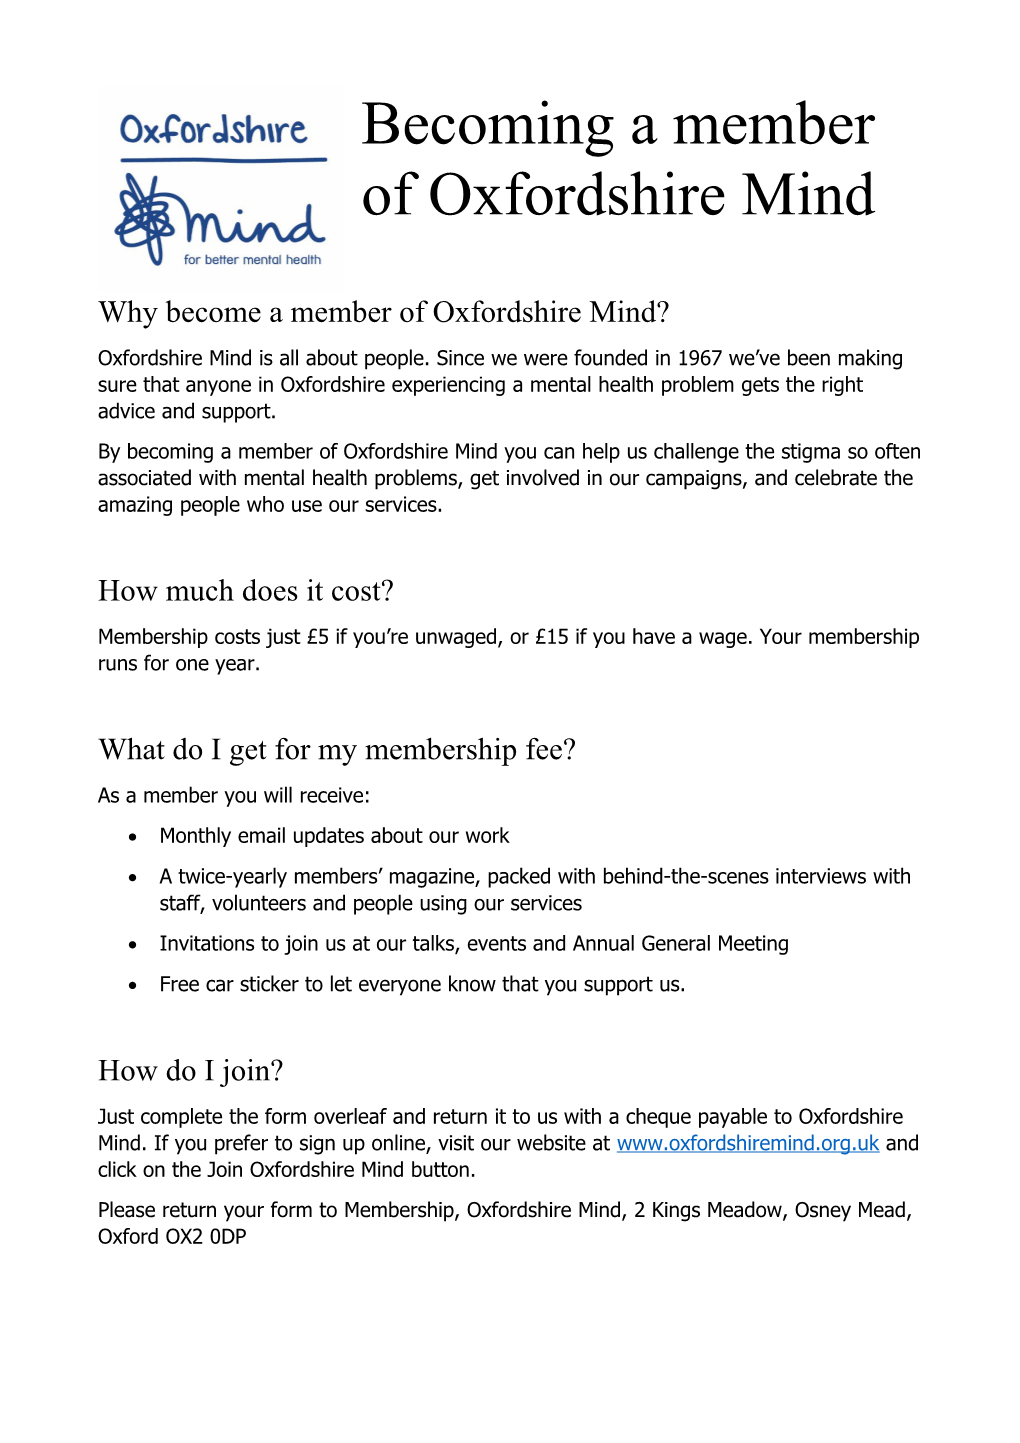 Why Become a Member of Oxfordshire Mind?